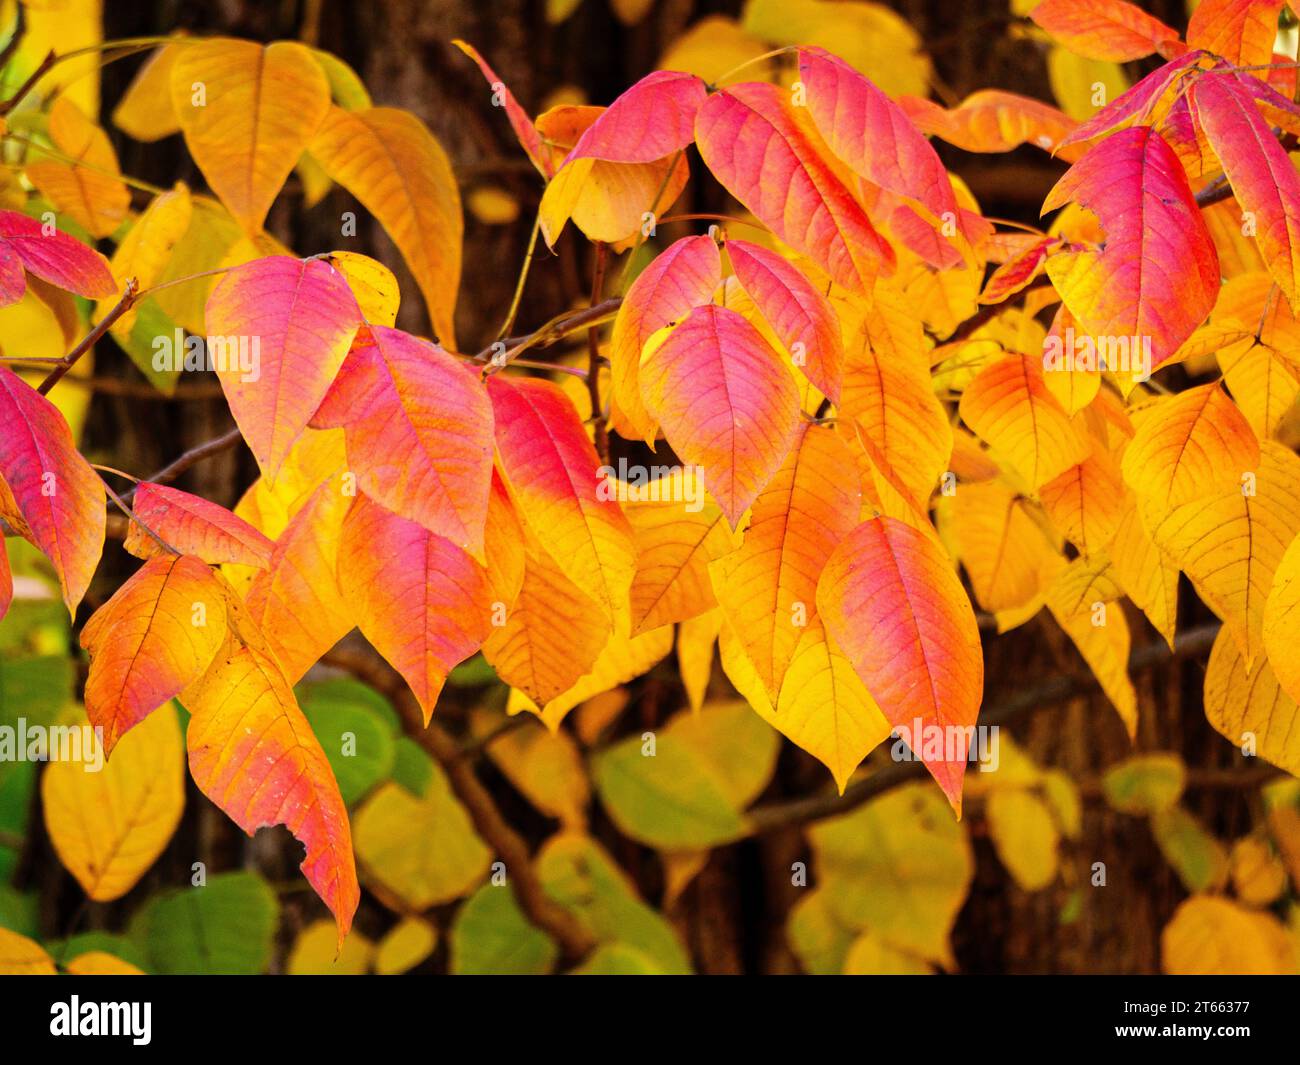 Poison ivy (Toxicodendron radicans) fall foliage color. Can cause contact dermatitis if touched by bare skin. Stock Photo